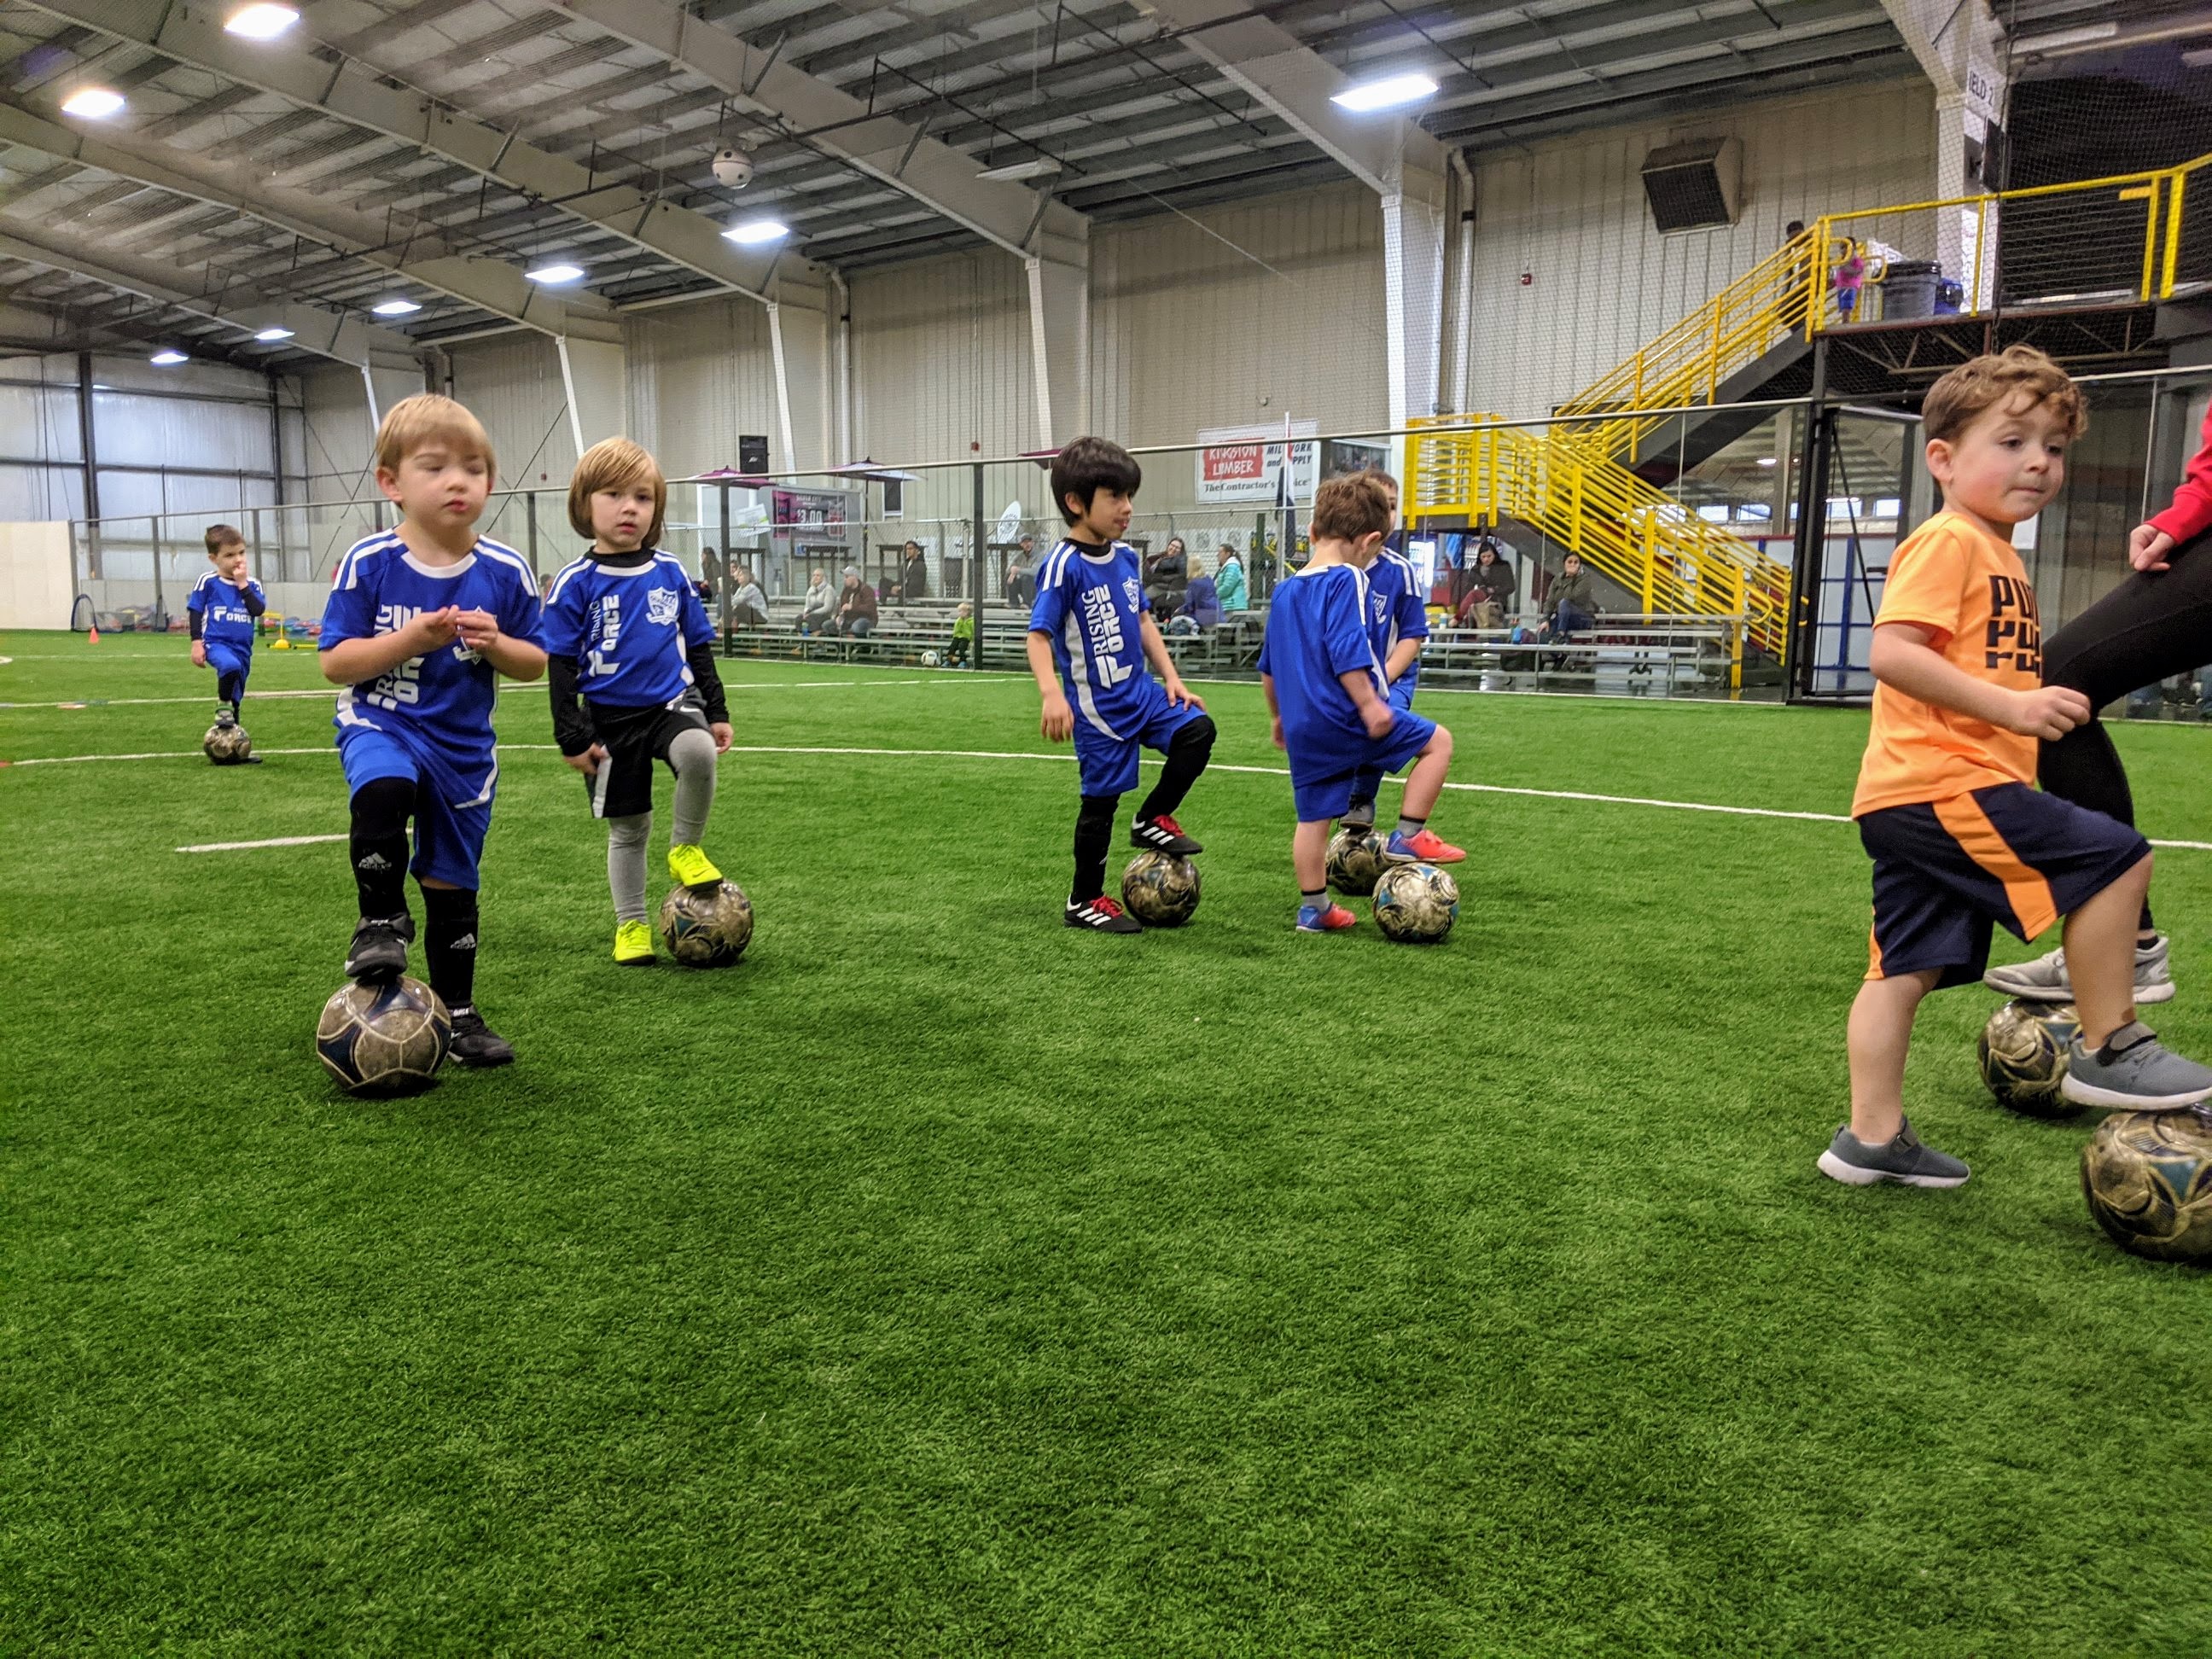 Children, each with one foot on their soccer ball, participating in a Kickin' Krakens class at Bremerton Sports Center